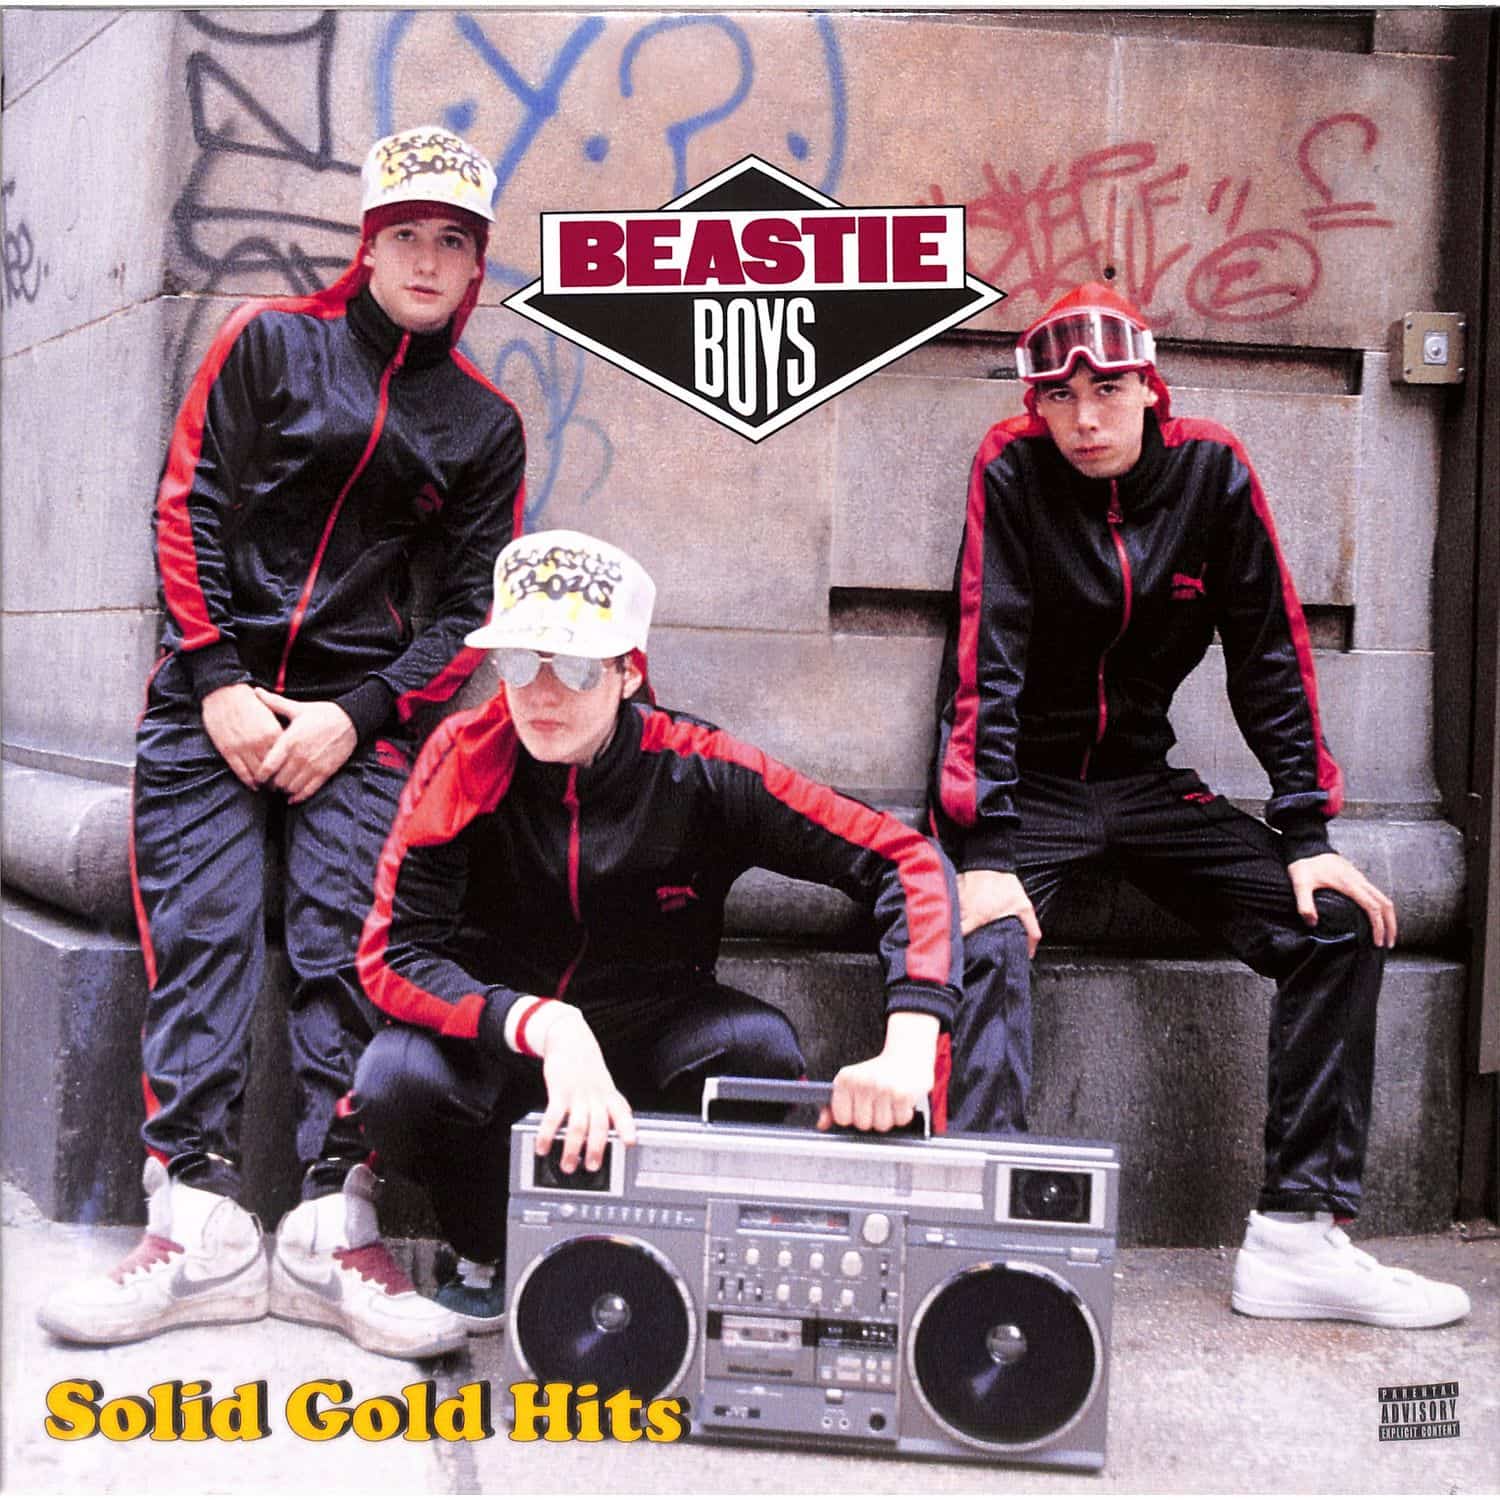 Beastie Boys - SOLID GOLD HITS 